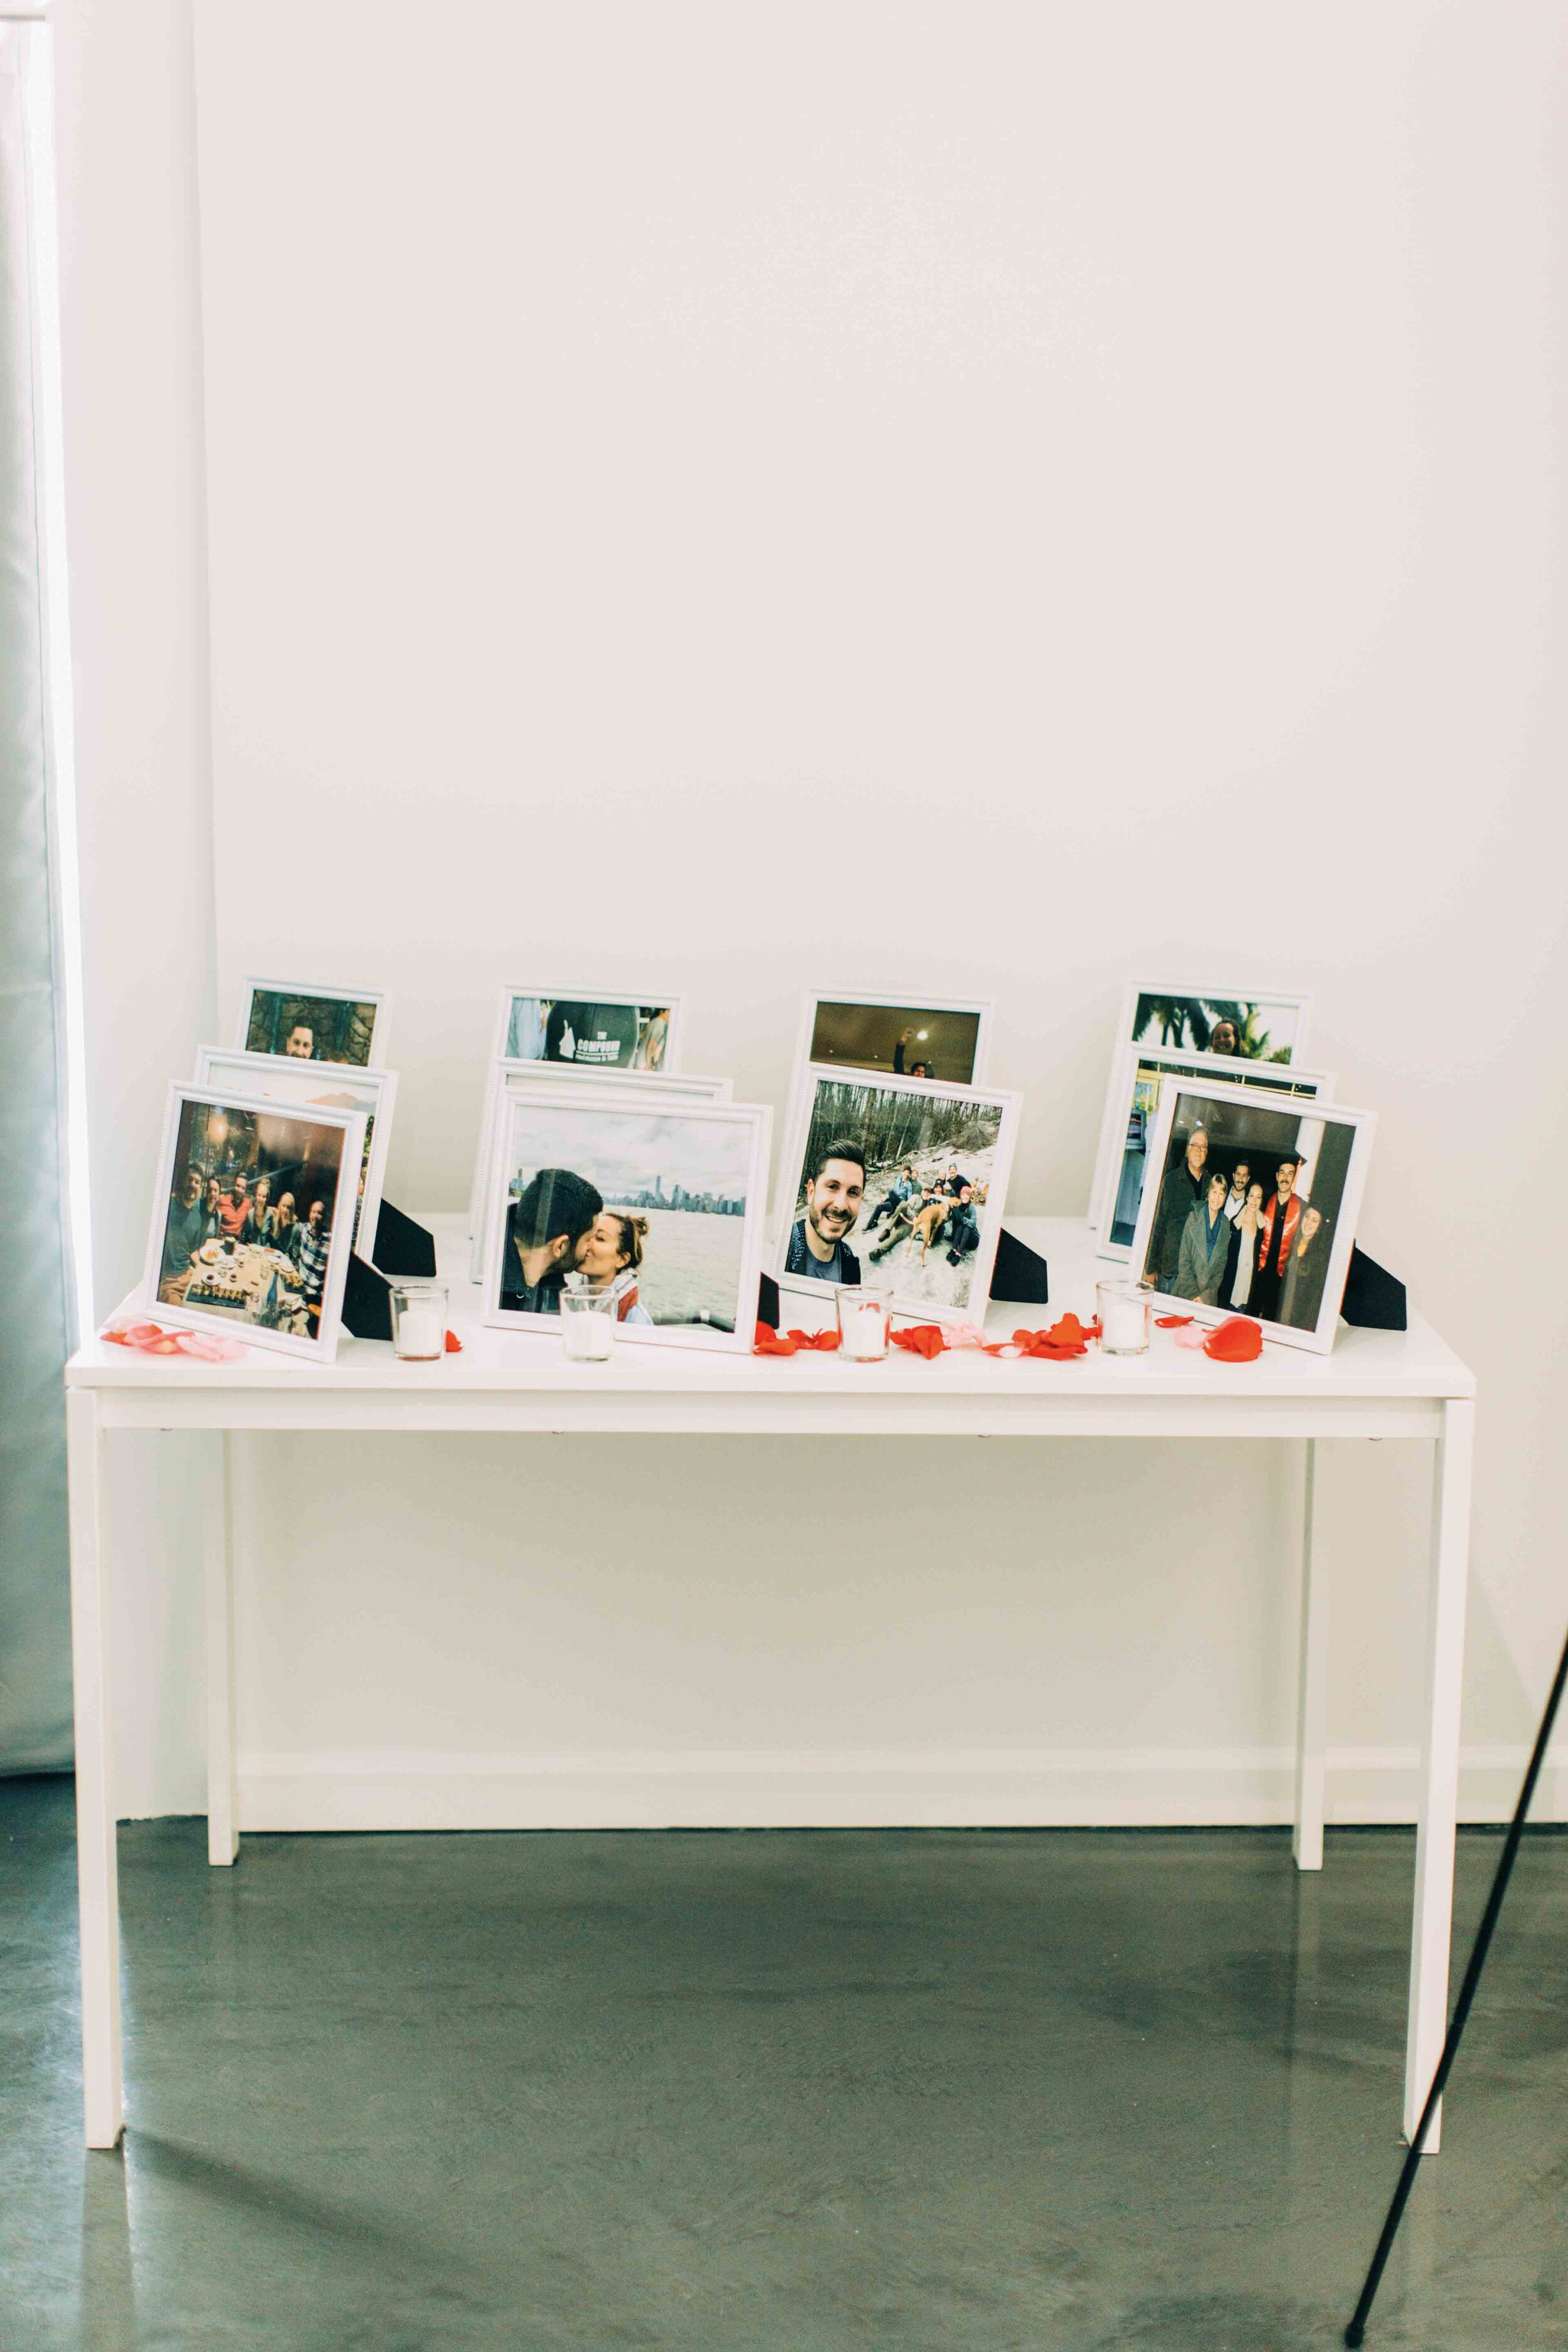 Photo memories printed and framed on table display